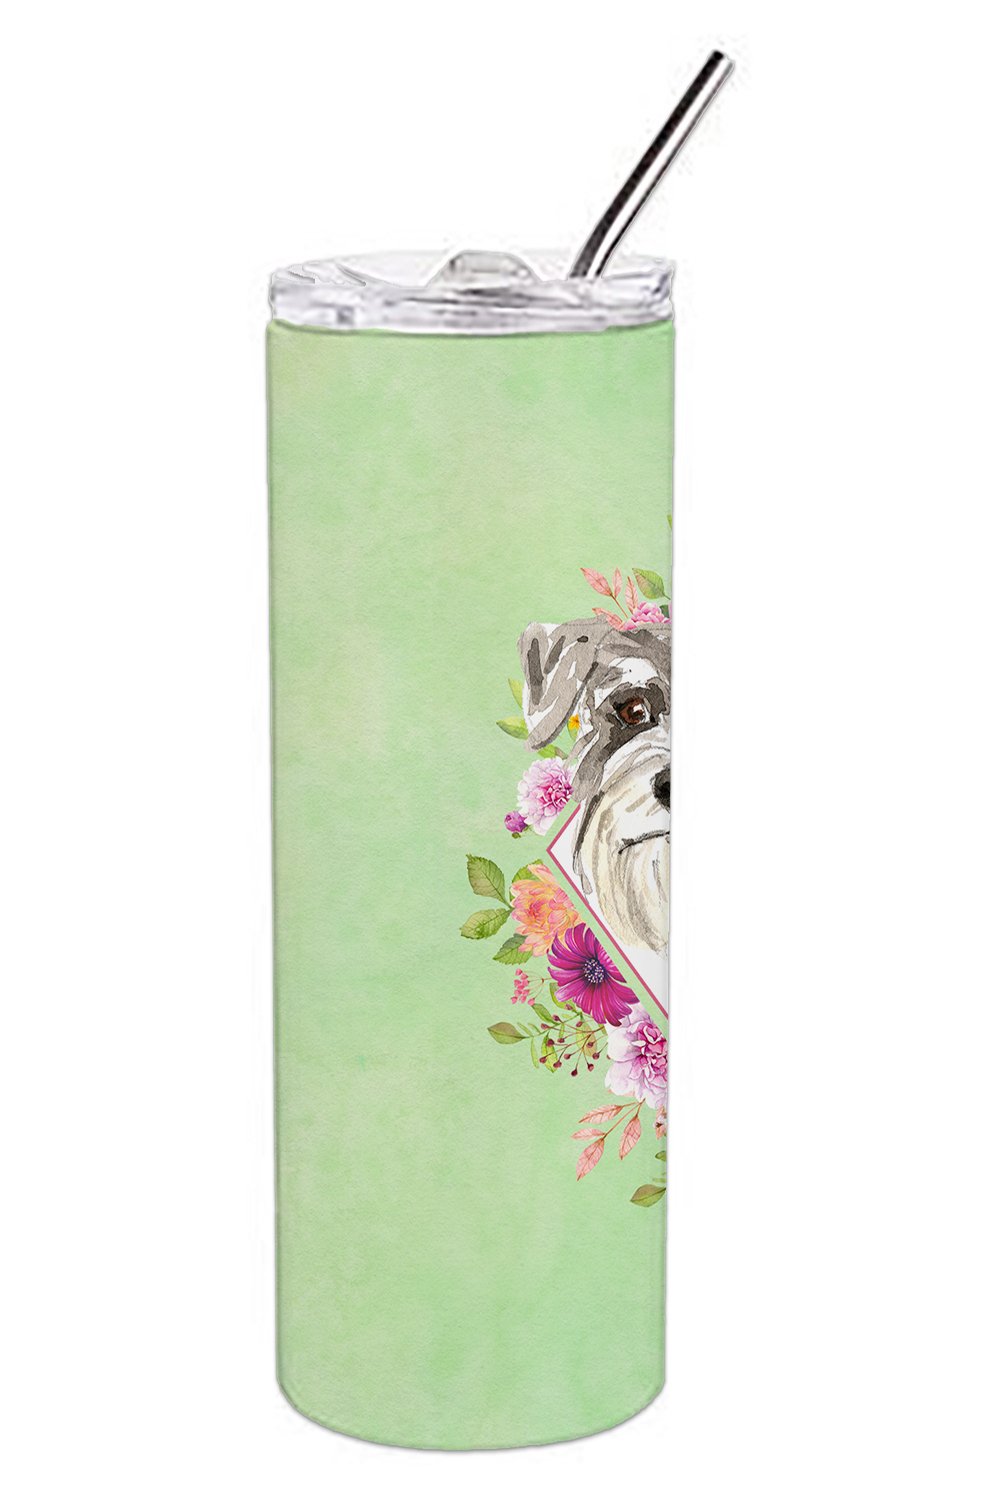 Schnauzer #1 Green Flowers Double Walled Stainless Steel 20 oz Skinny Tumbler CK4375TBL20 by Caroline's Treasures